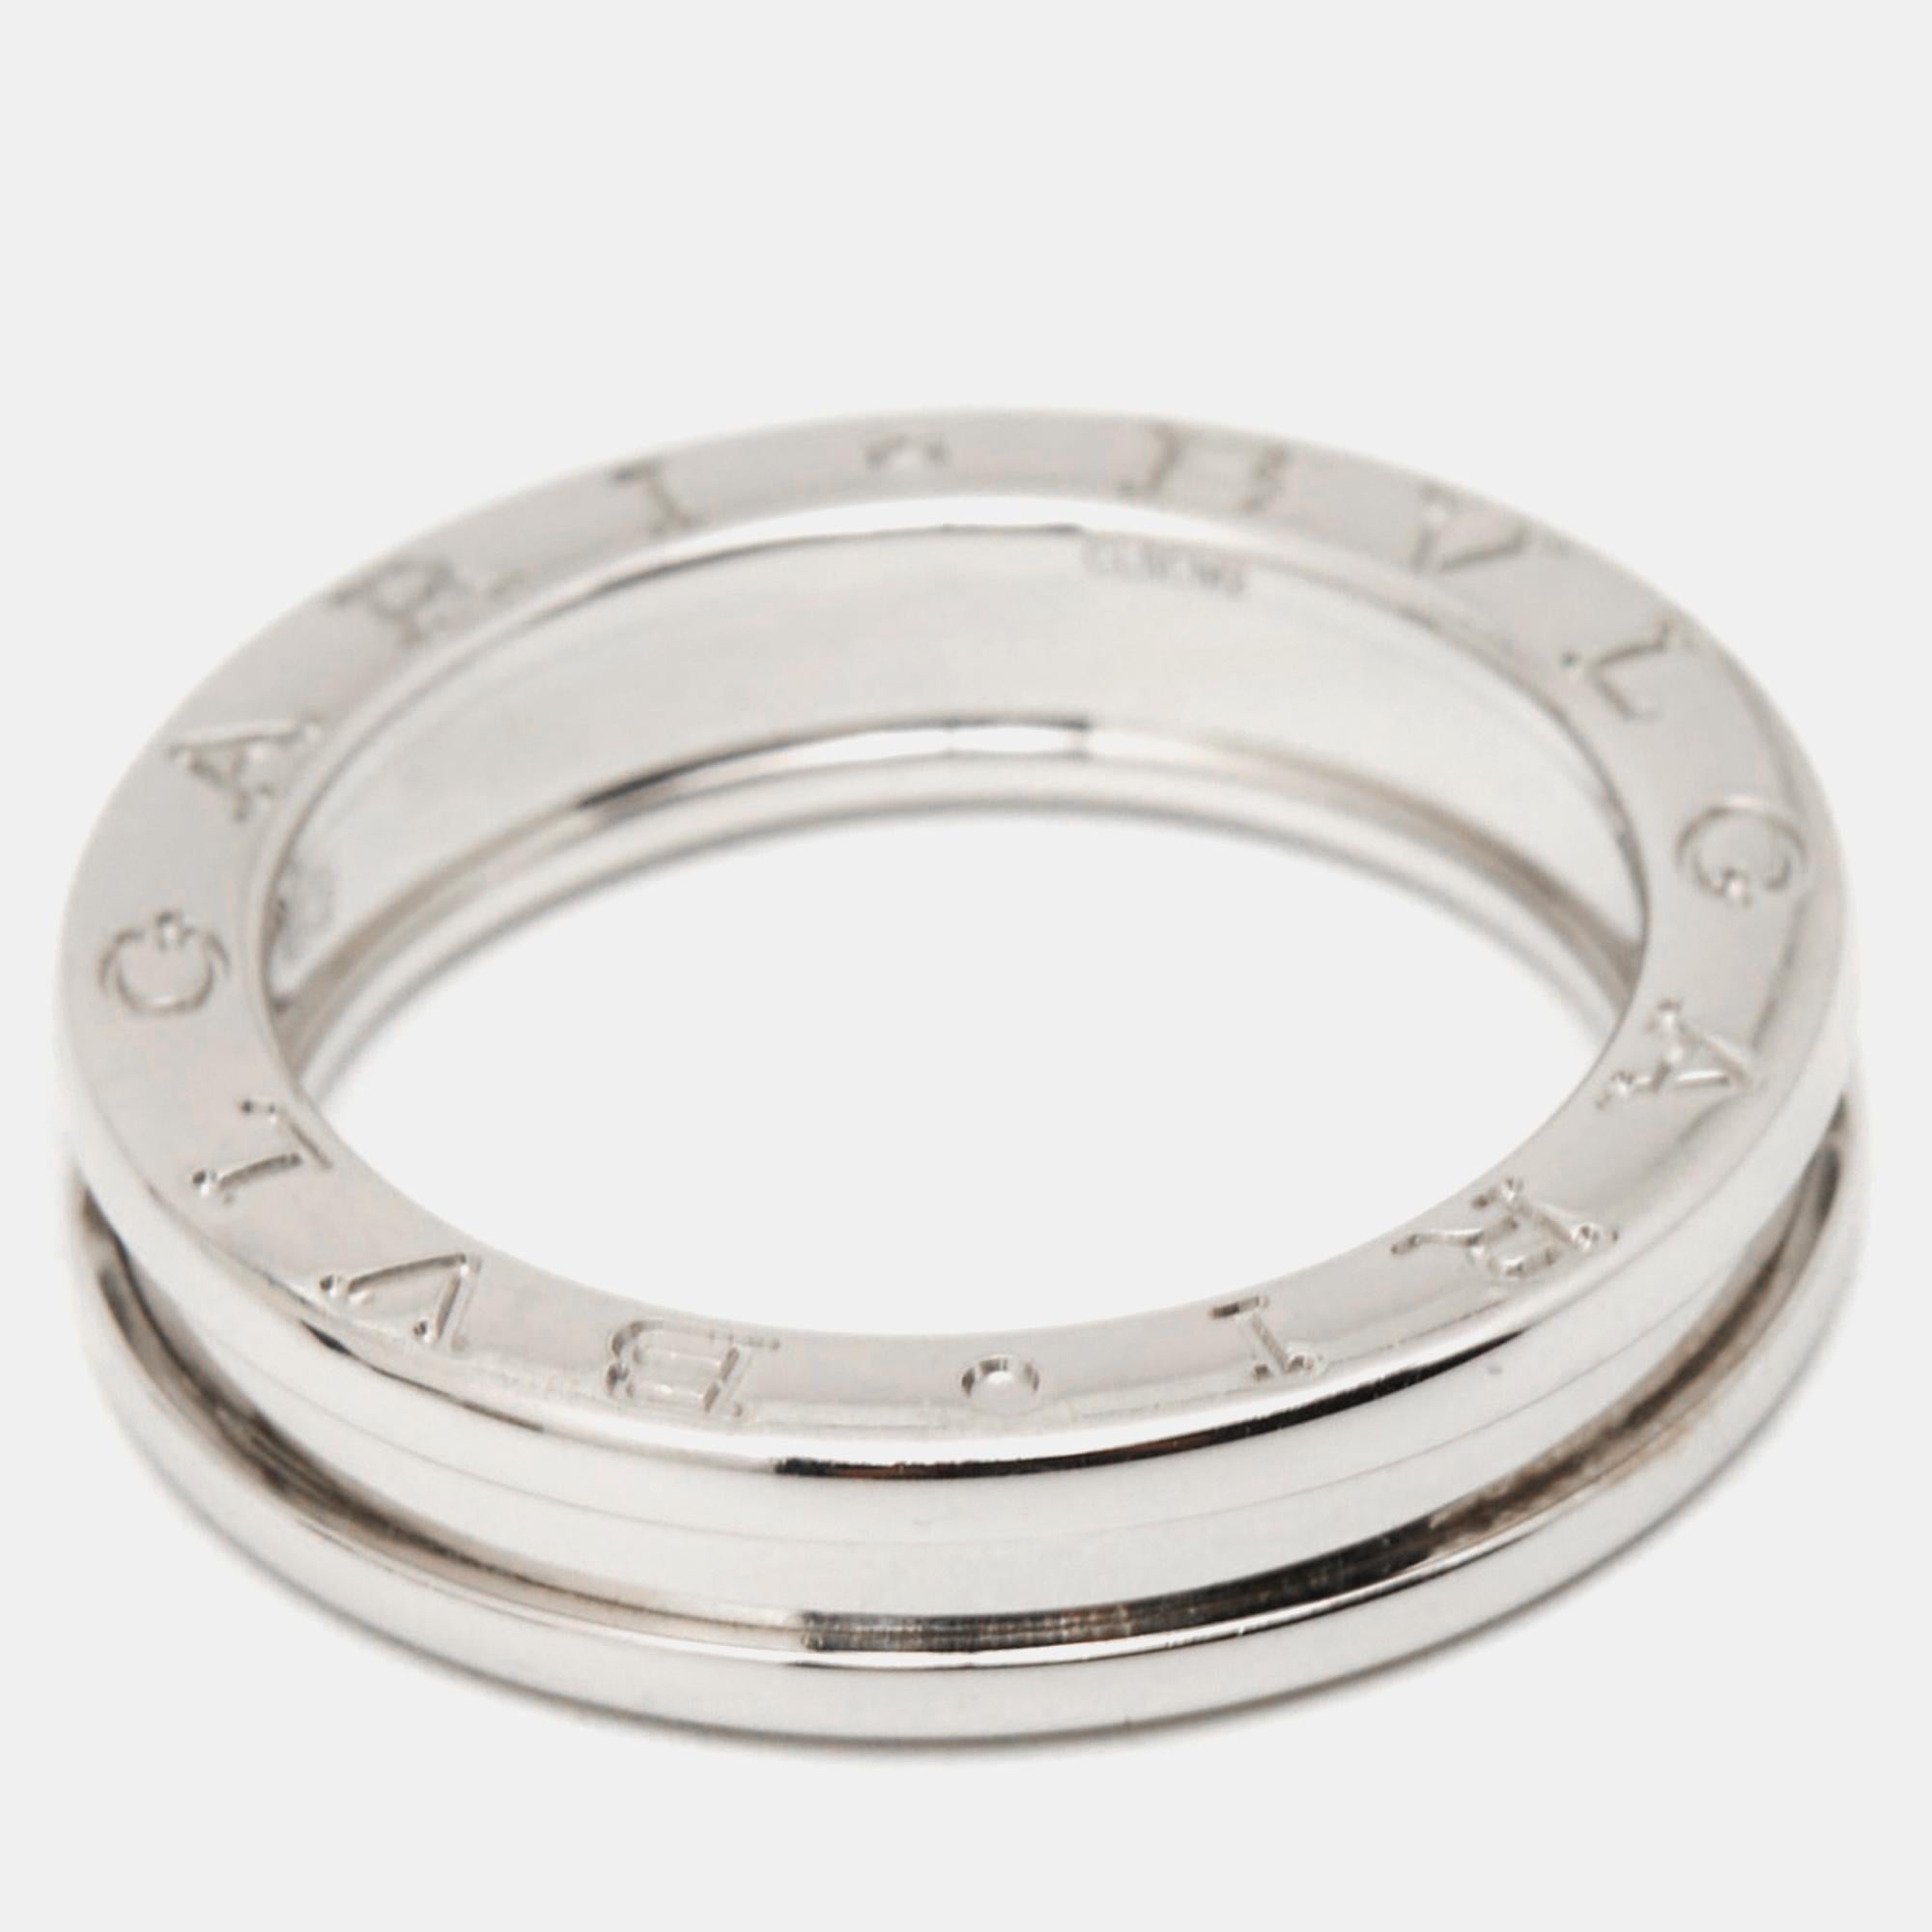 Sculpted with precision and opulence, the Bvlgari B.Zero1 ring exudes timeless charm. Its sleek design seamlessly marries modernity with tradition, showcasing the brand's mastery in jewelry craftsmanship. This exquisite piece embodies understated